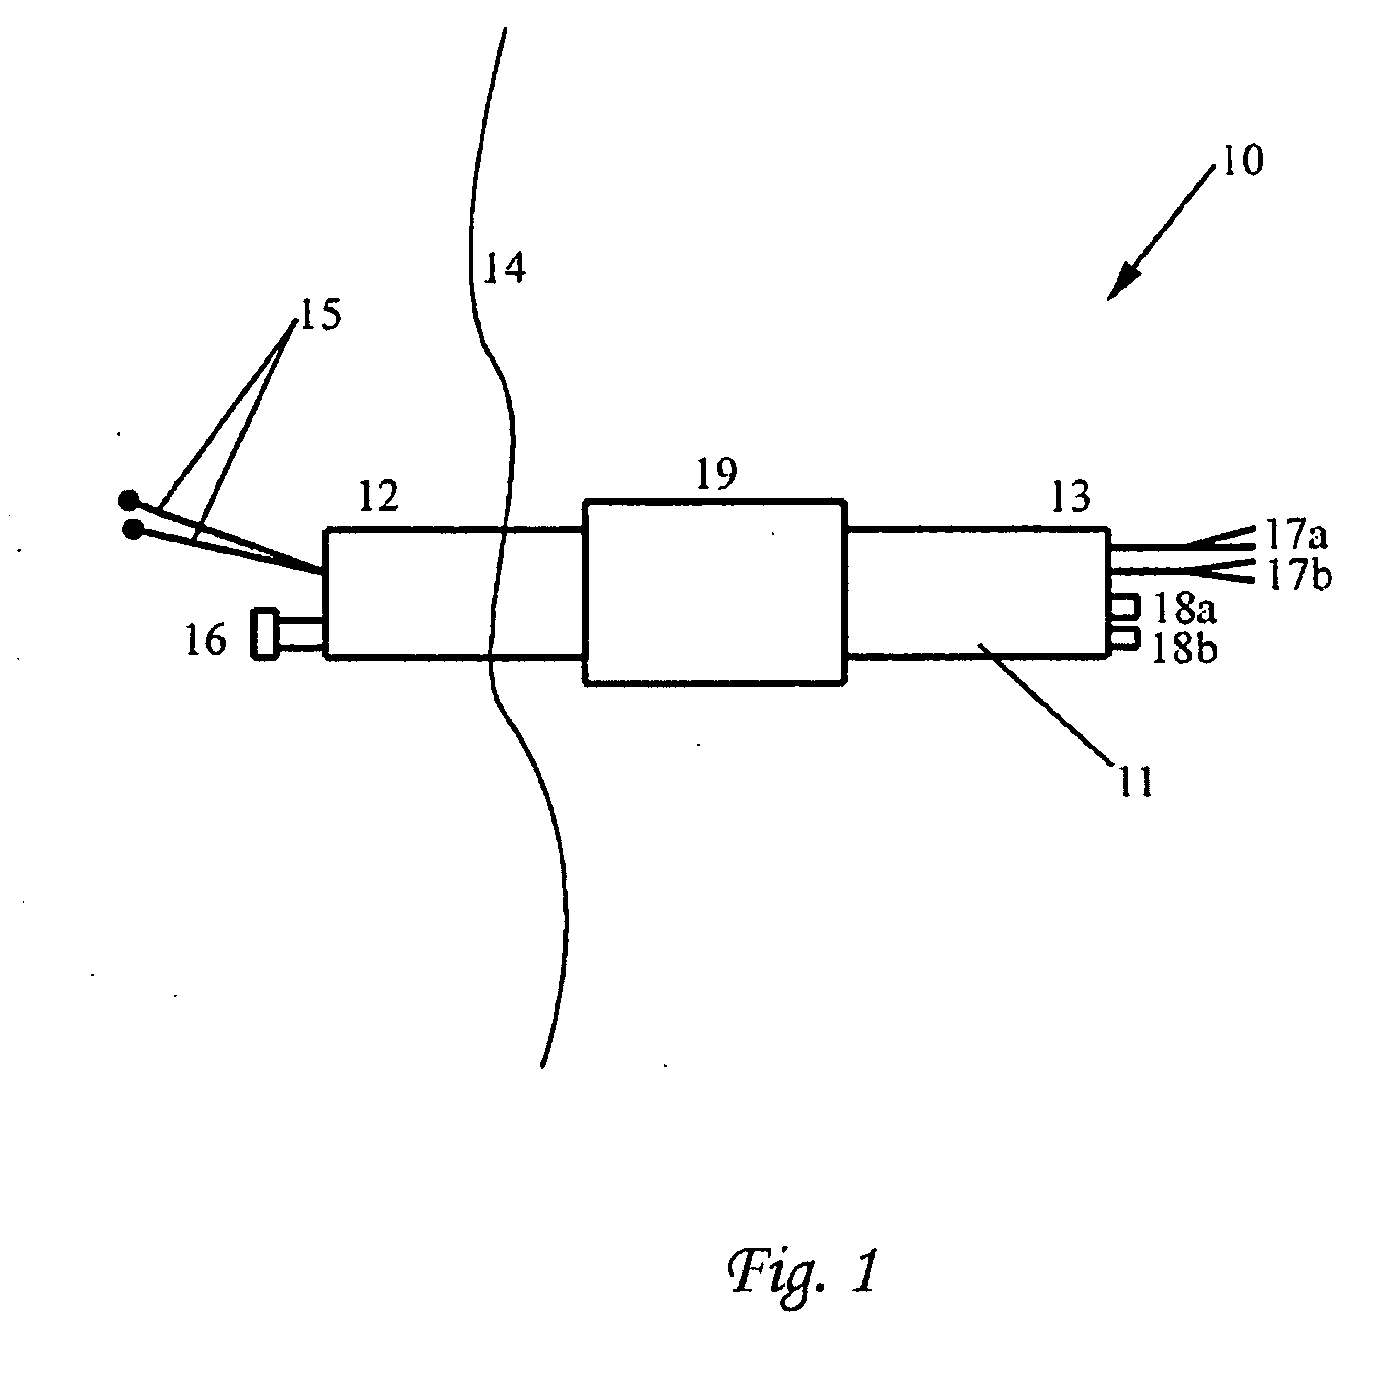 Trans-douglas endoscopical surgical device (TED) and methods thereof